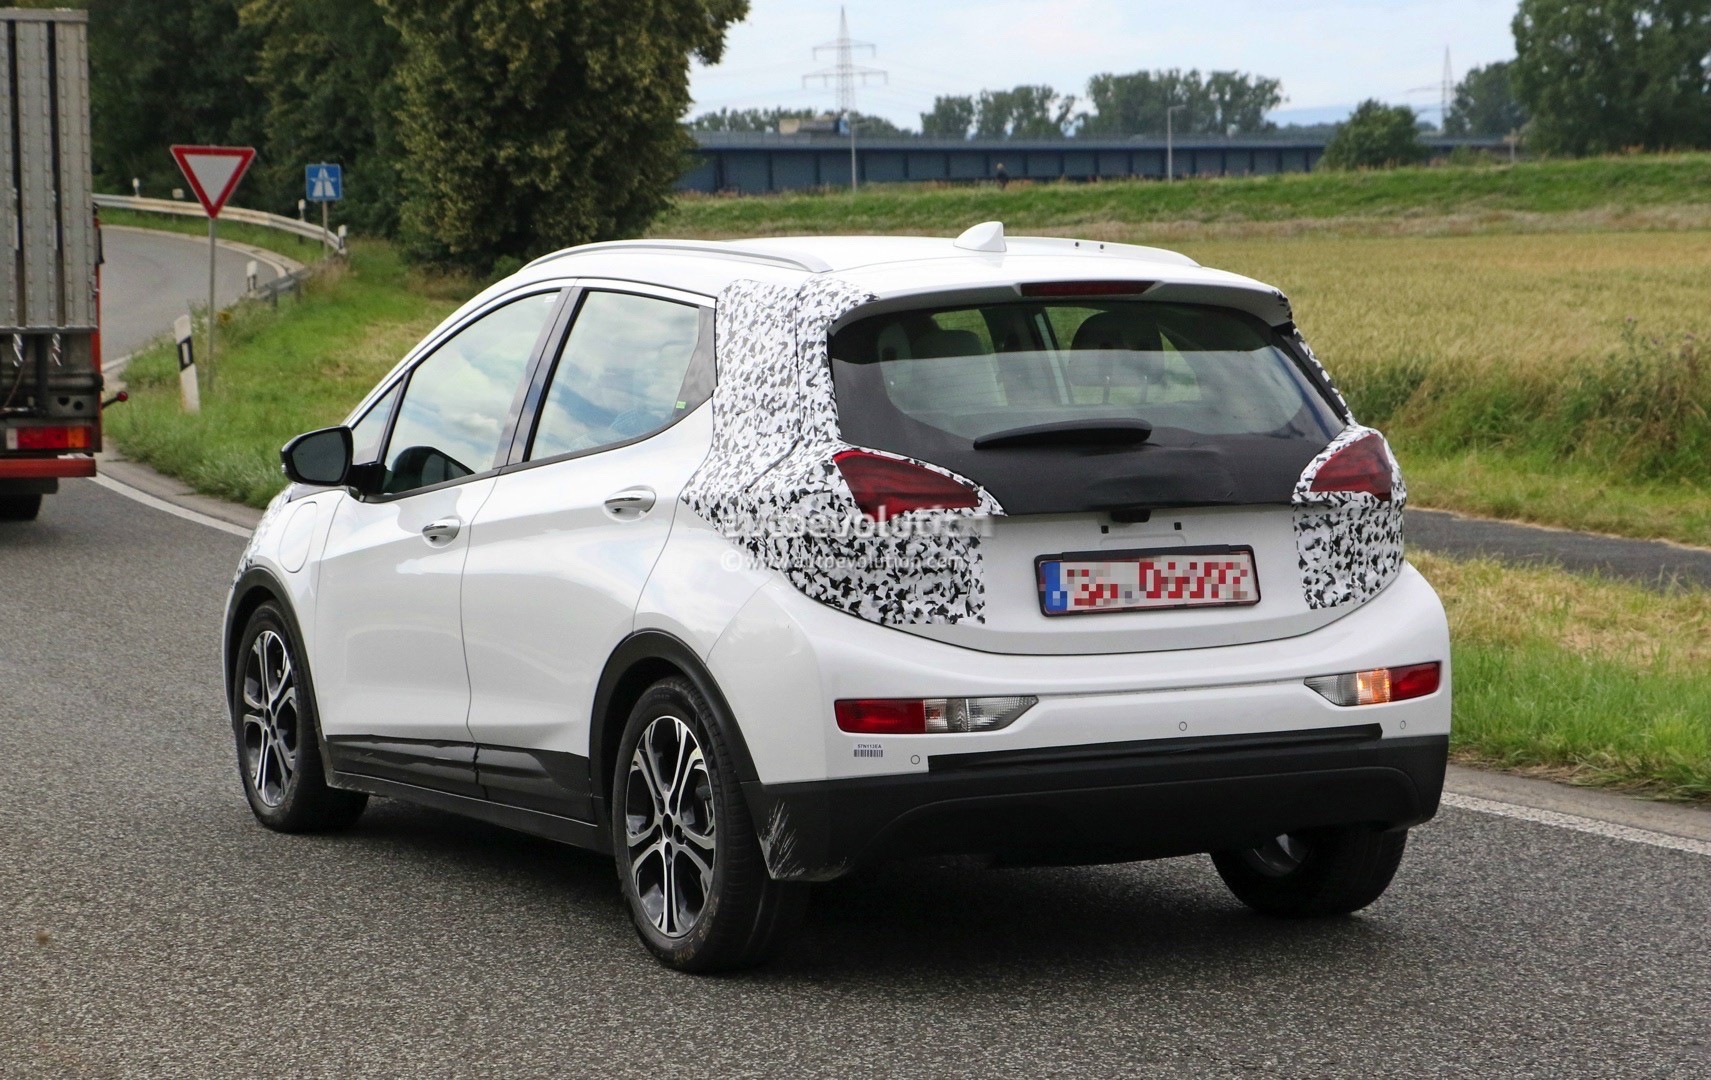 2017-opel-ampera-e-spied-in-germany-looks-almost-ready-for-production_8.jpg